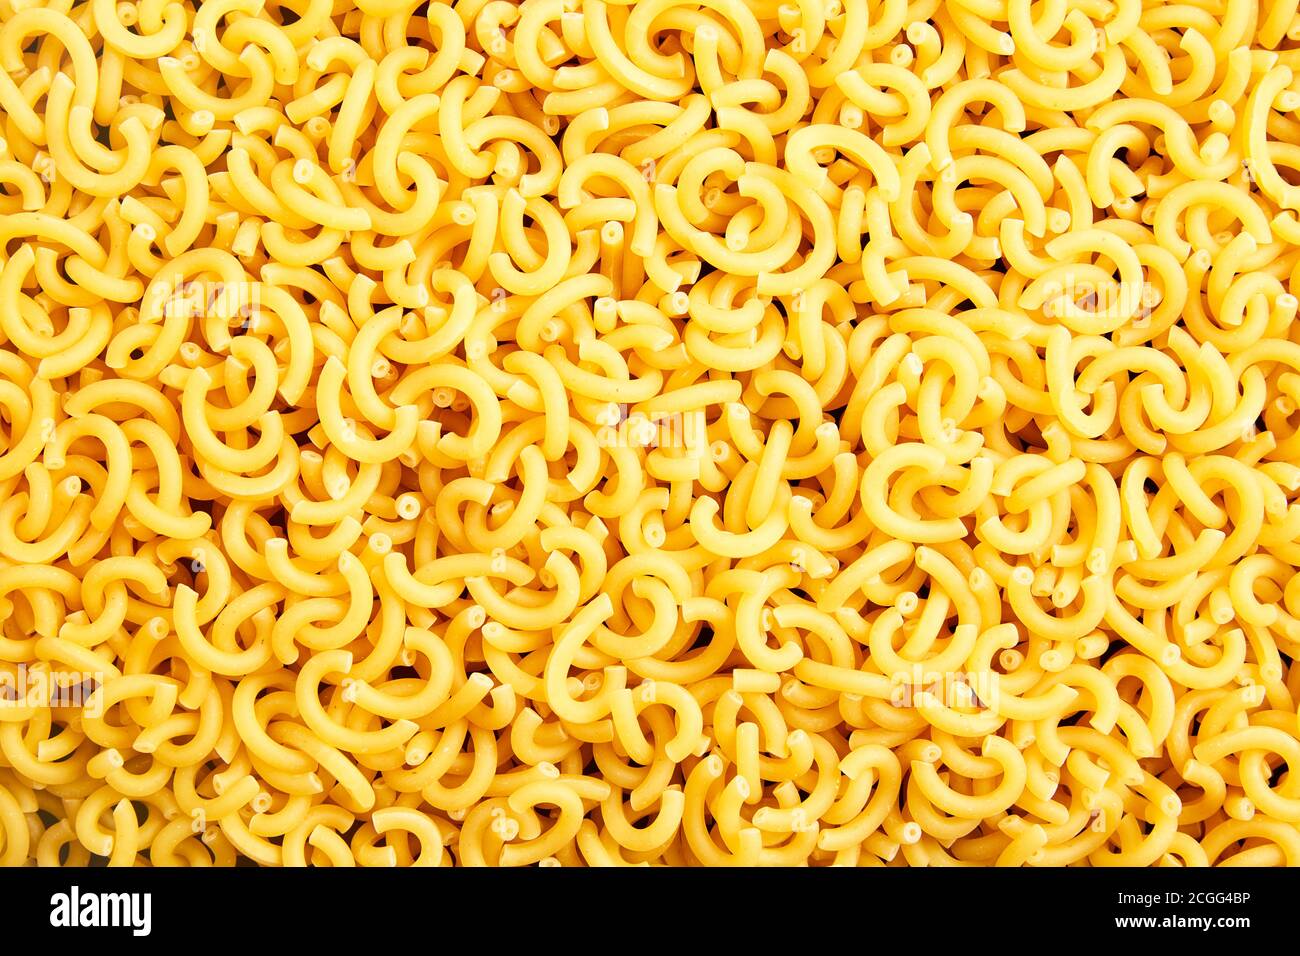 Background of noodles, Italian pasta. Ideal for publicity background. Food concept Stock Photo